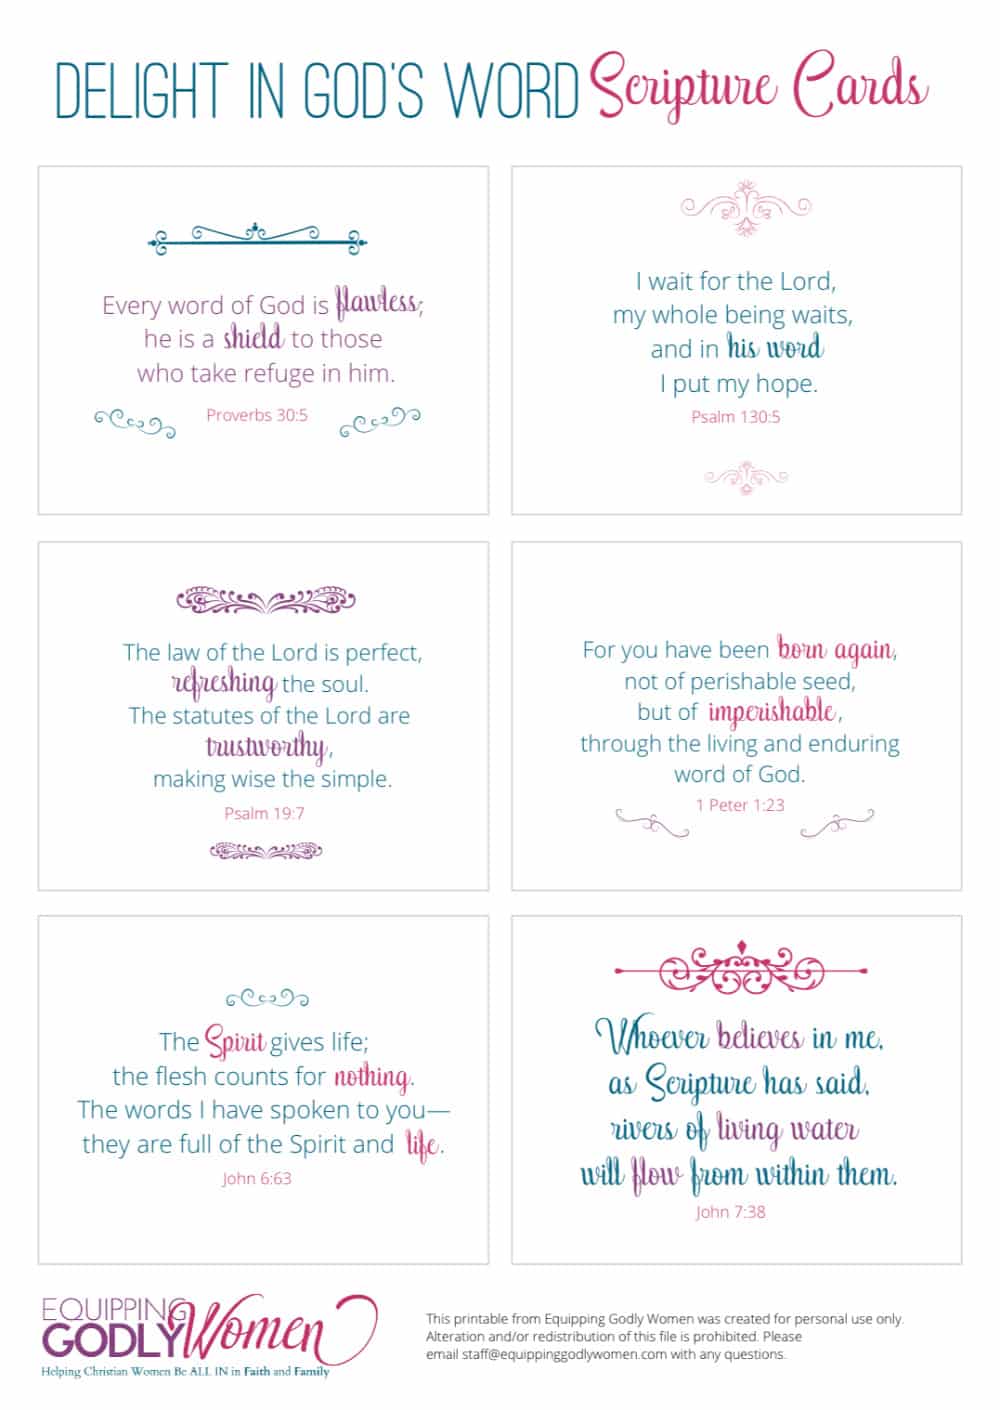 Delight in God's Word Scripture Cards